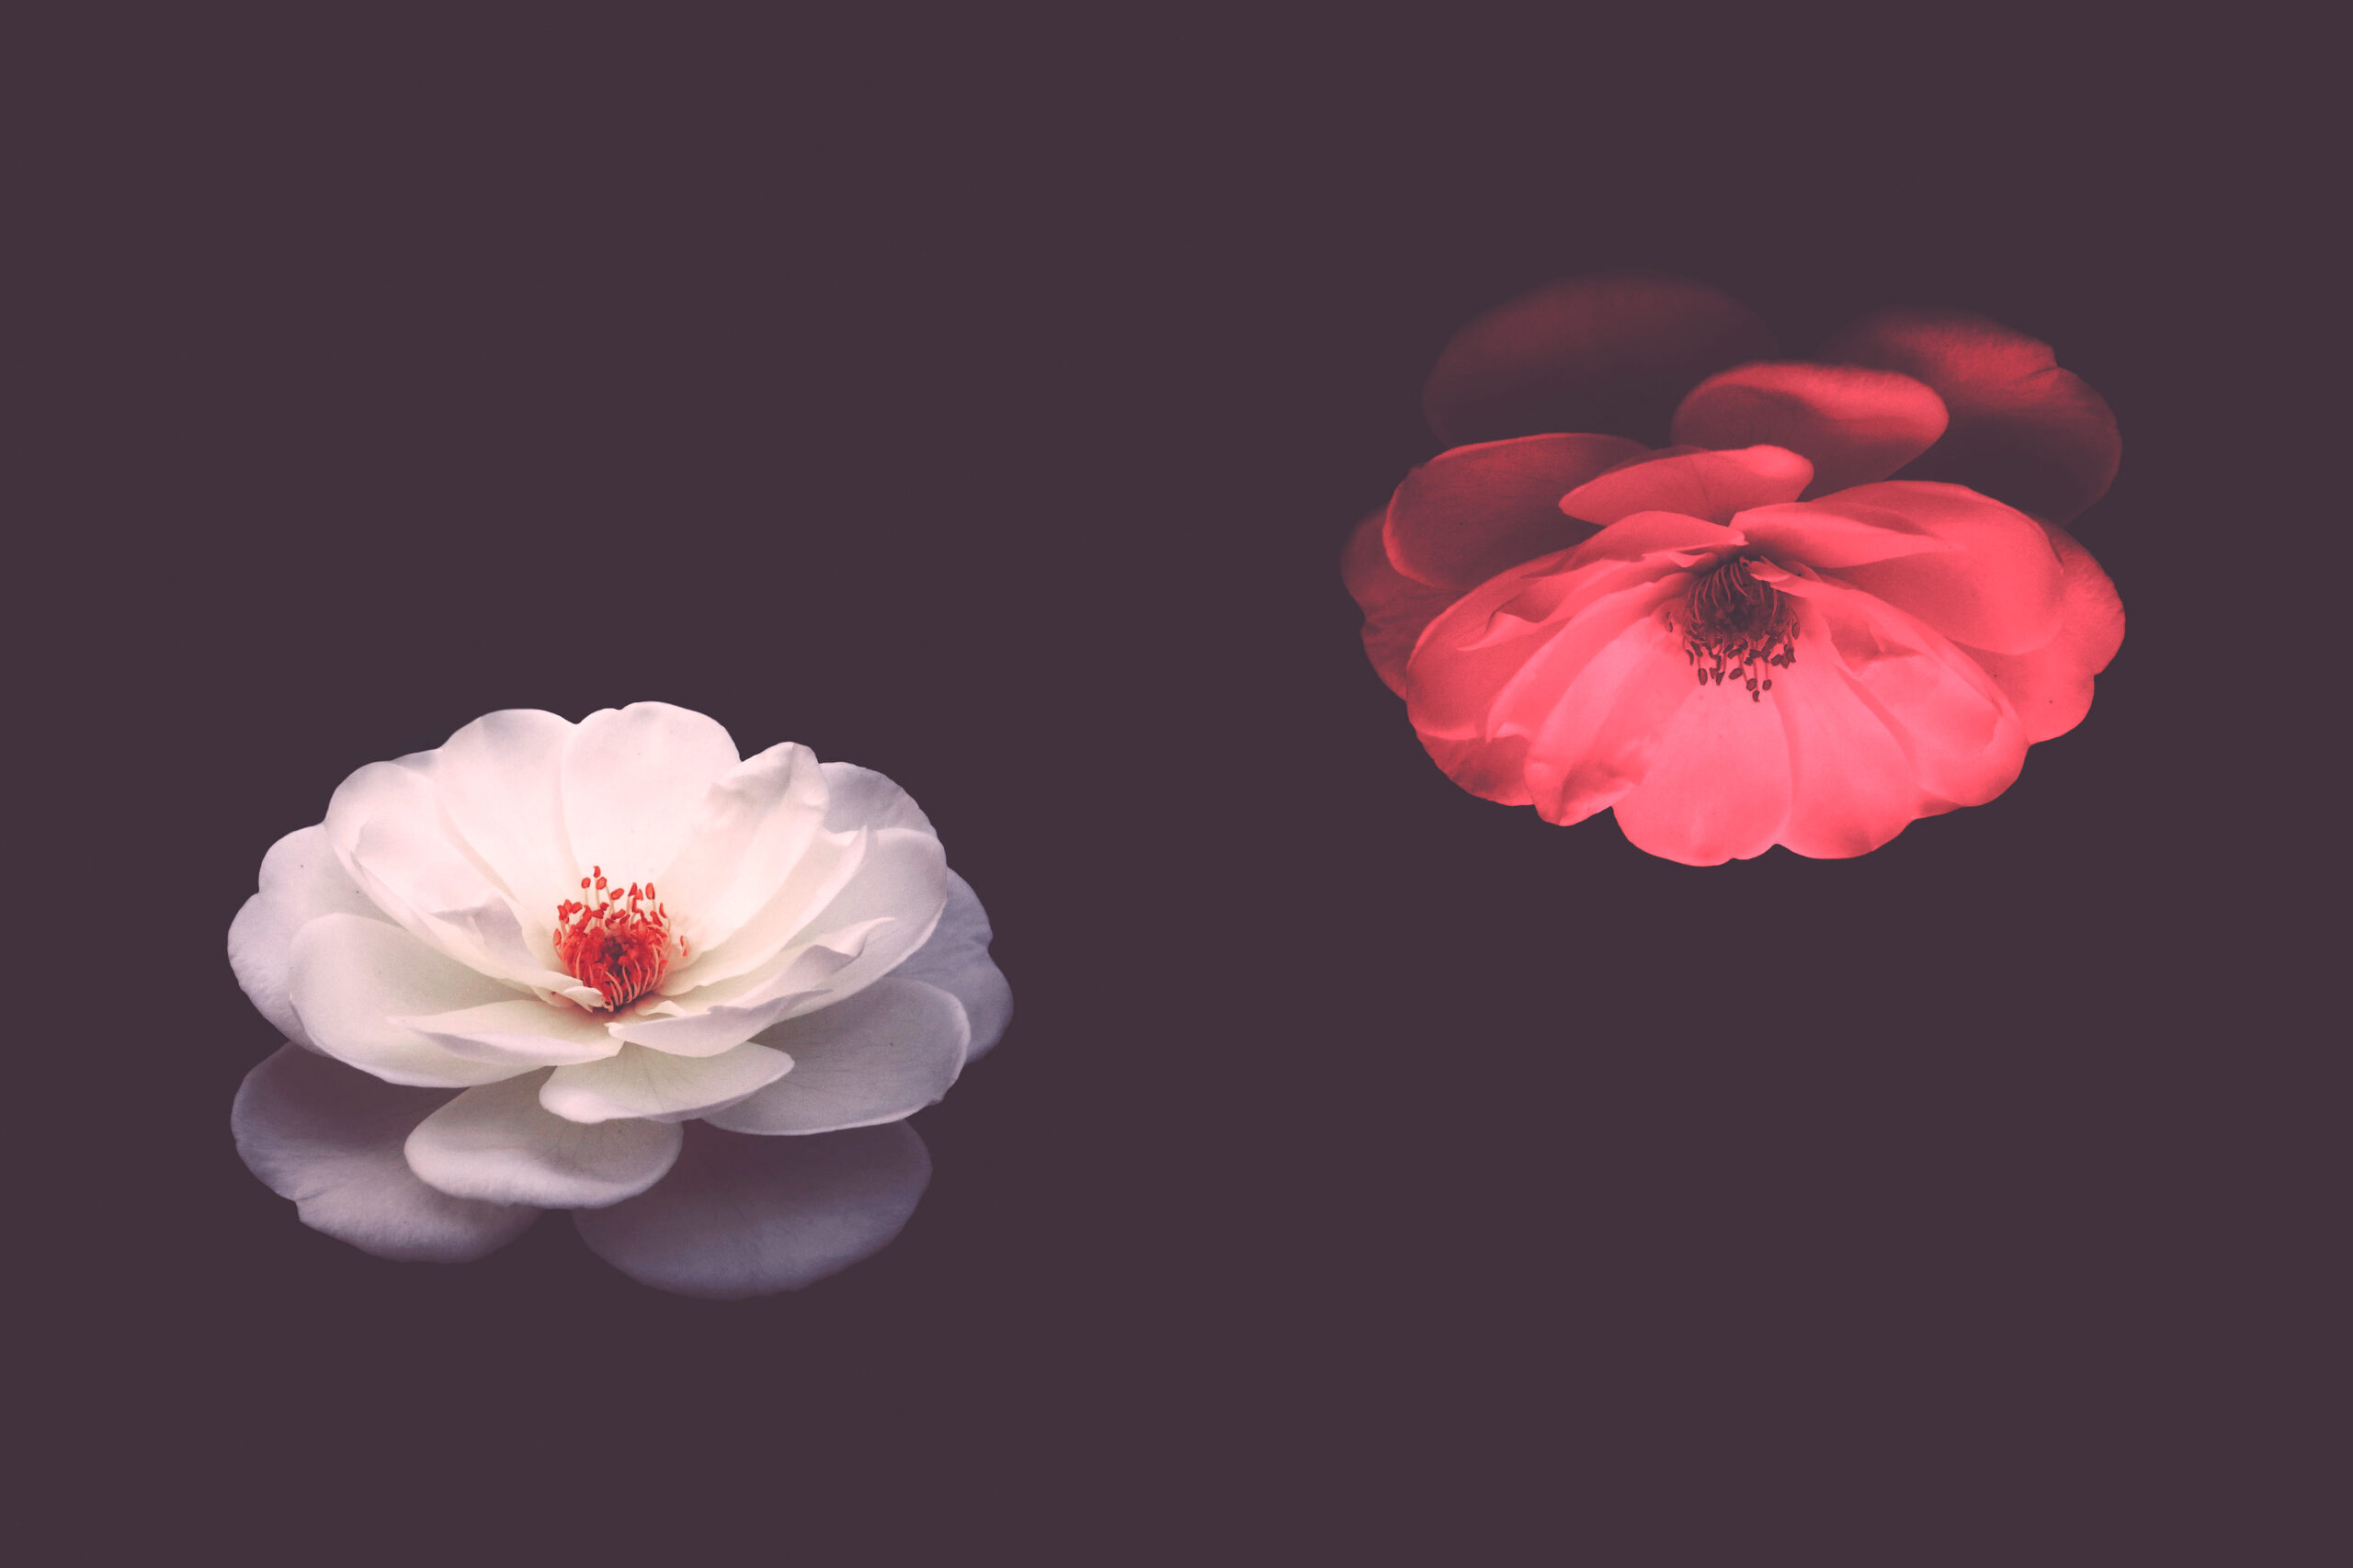 Two flowers, one white and one red on a maroon colored background. Text reads: Source, photo by Majid Rangraz on Unsplash.